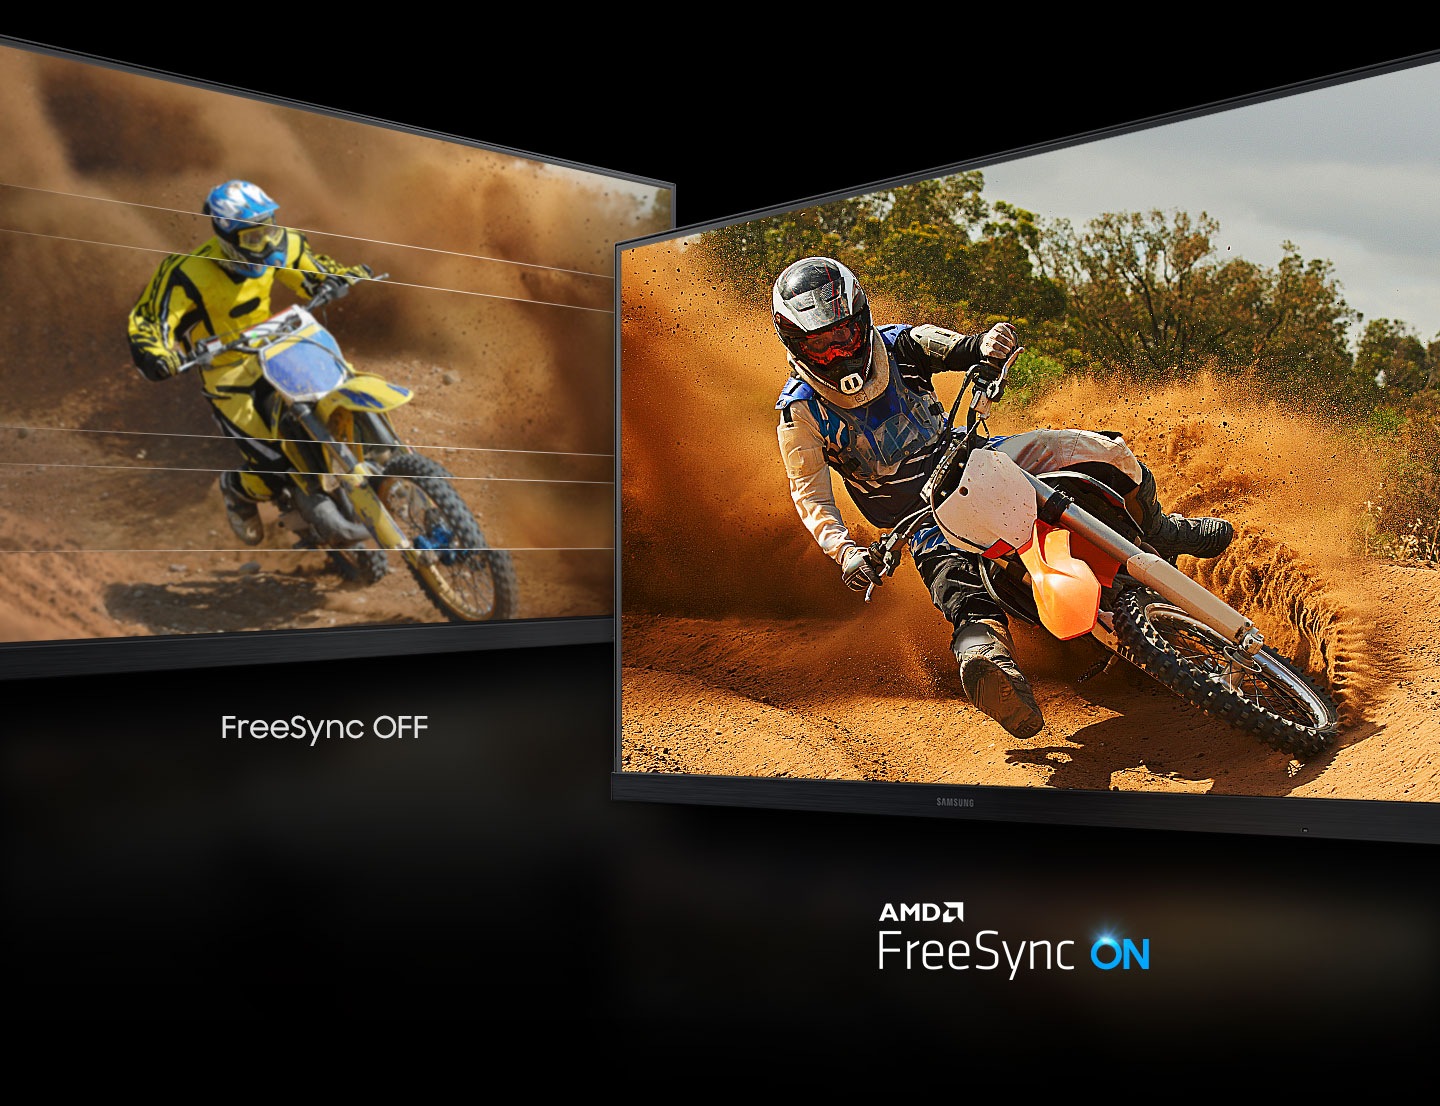 Comparison between FreeSync OFF and AMD FreeSync On. FreeSync OFF causes tearing in the image of the rider on the monitor, but the image of the rider on the AMD FreeSync monitor is clearly visible without obstruction.